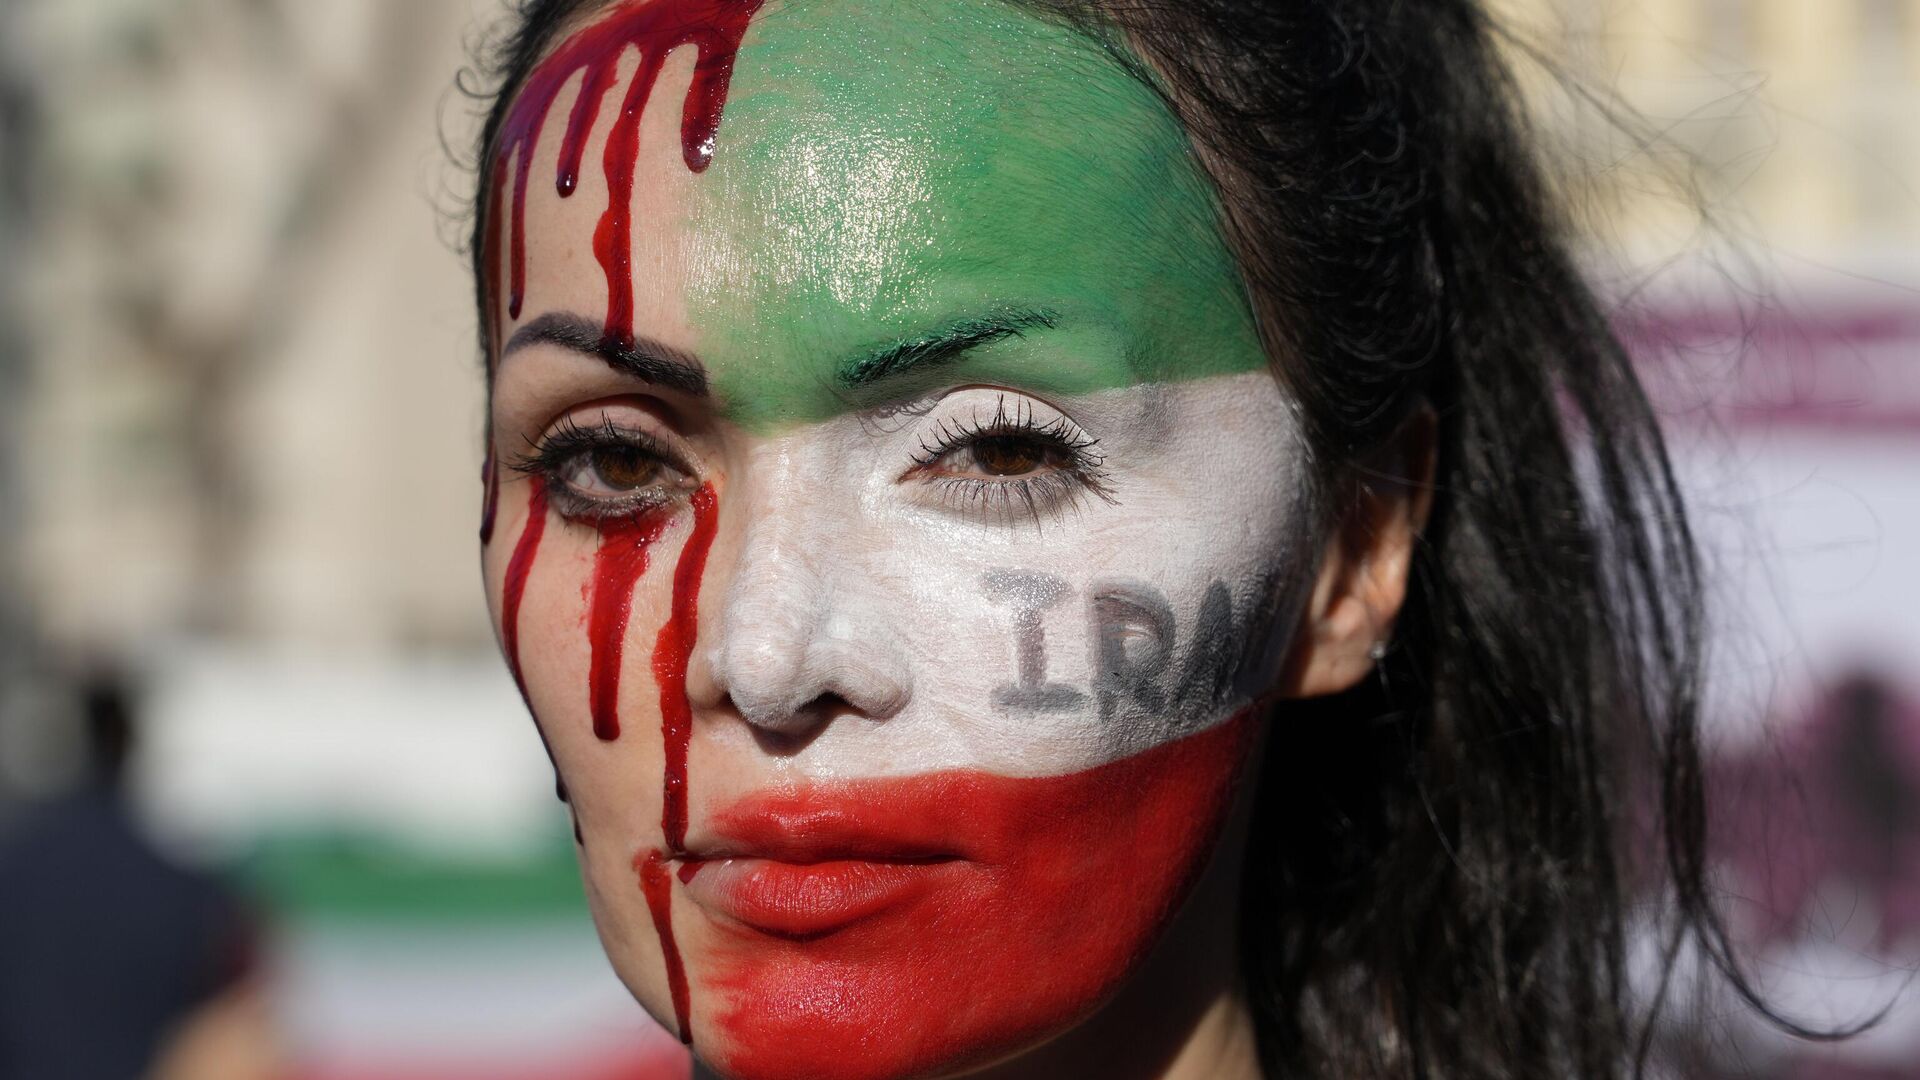 A woman is painted on a her face during a protest against the death of Mahsa Amini, a woman who died while in police custody in Iran, during a rally in central Rome, Saturday, Oct. 29, 2022. - Sputnik International, 1920, 13.03.2023